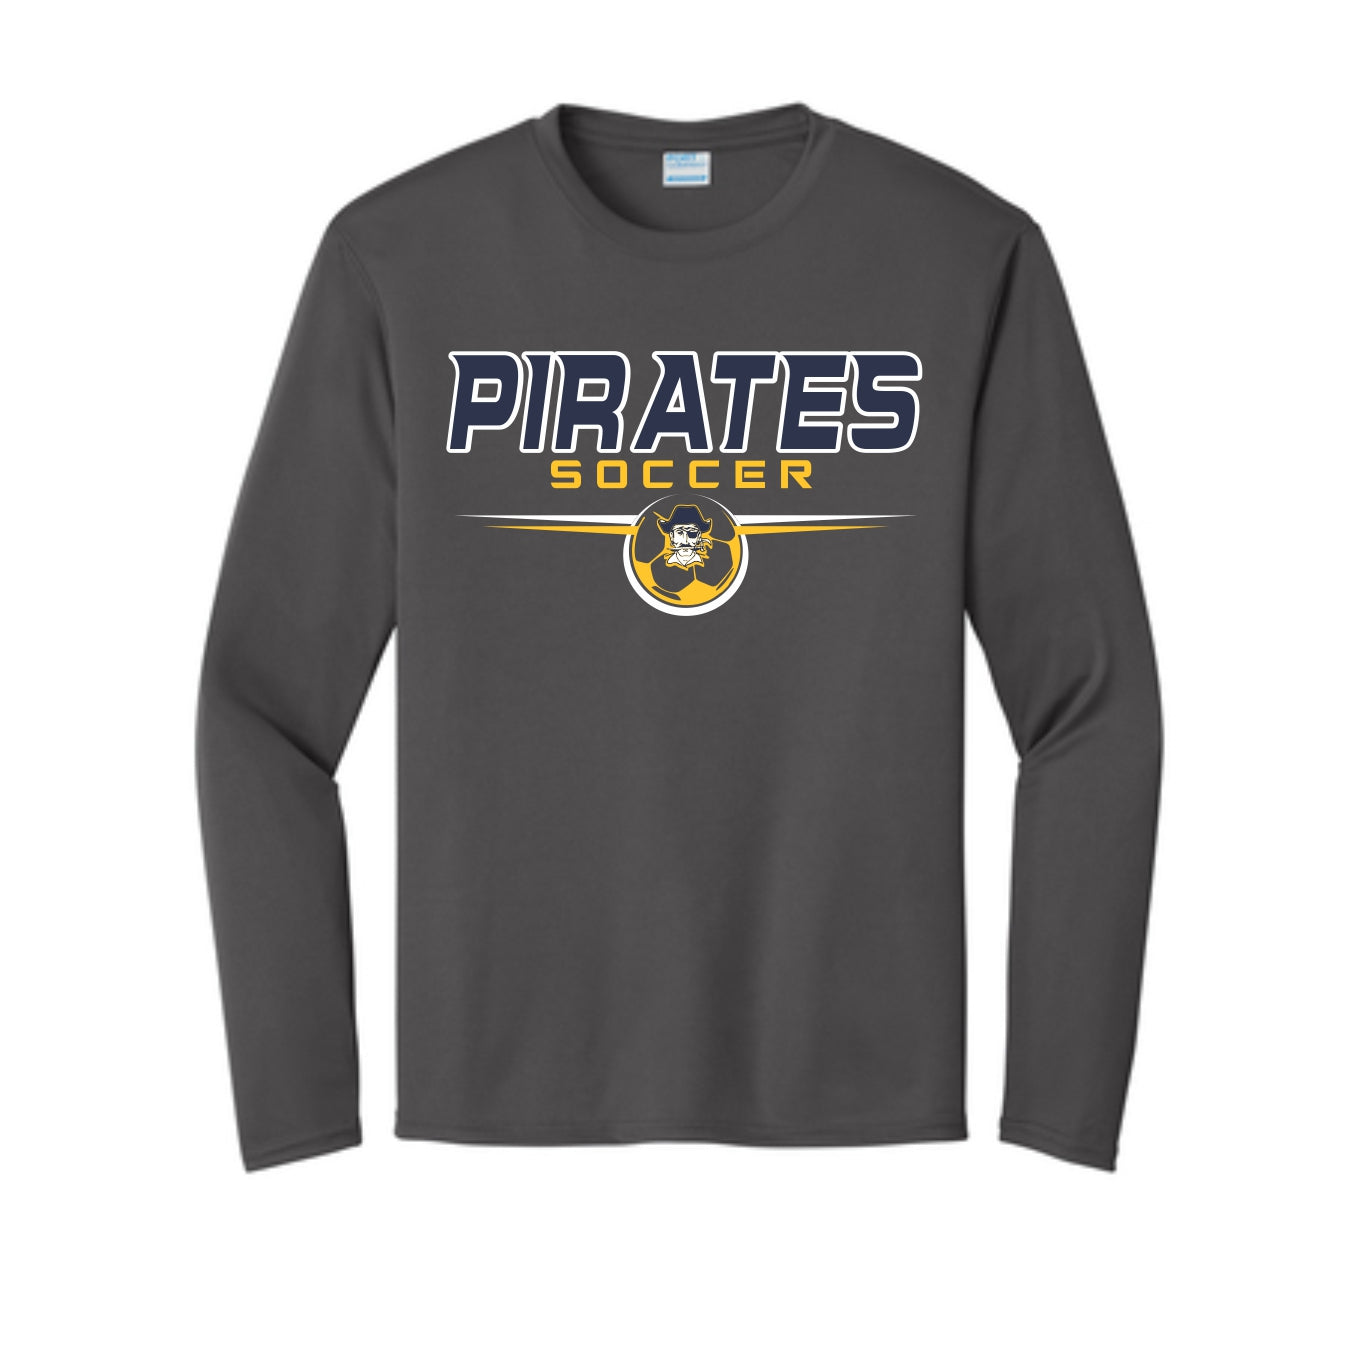 PIrate Boys Soccer -- Performance Long Sleeve -- Adult/Youth